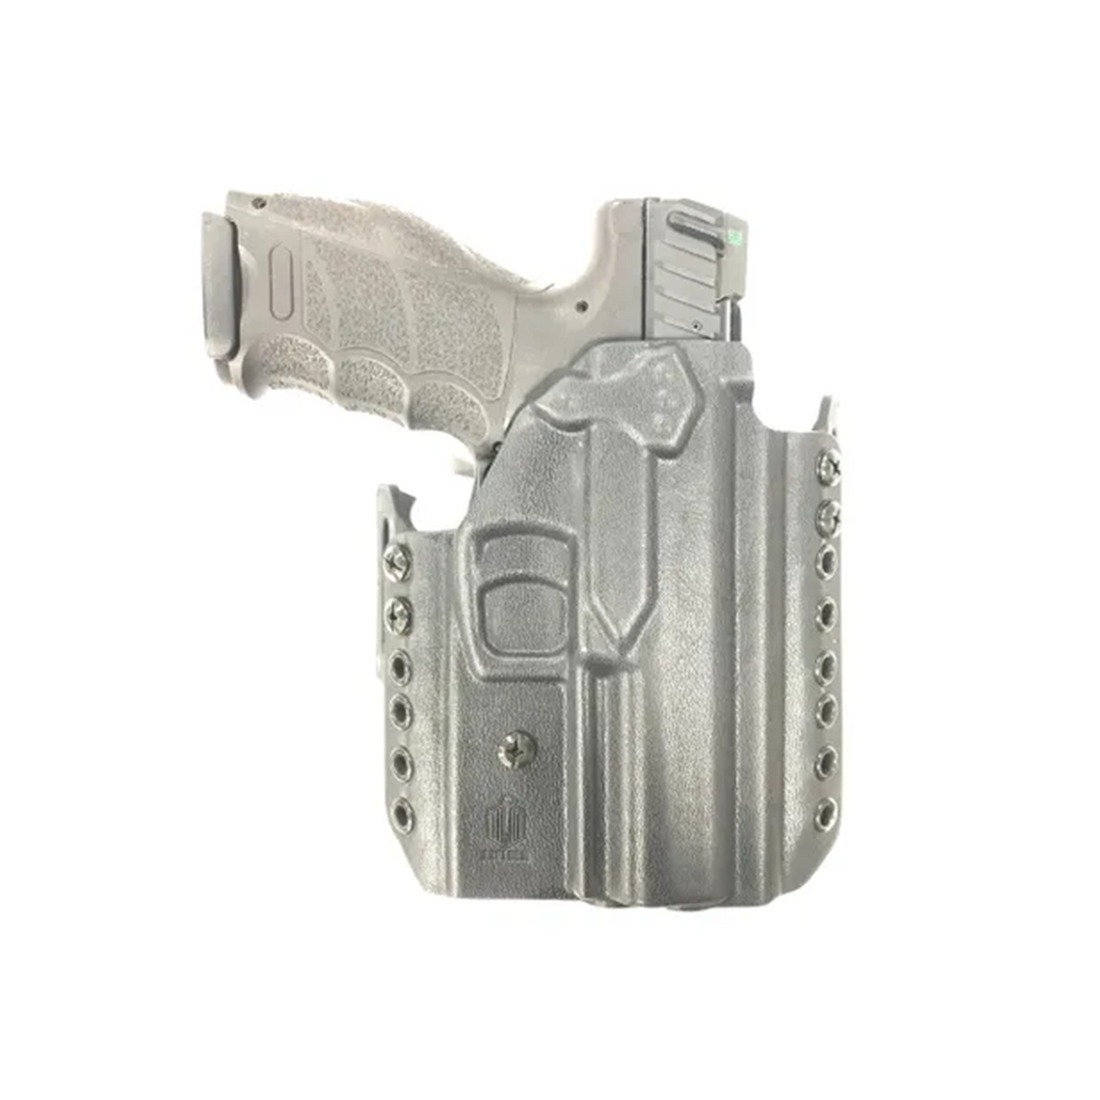 Rock Island Armory OWB Holsters